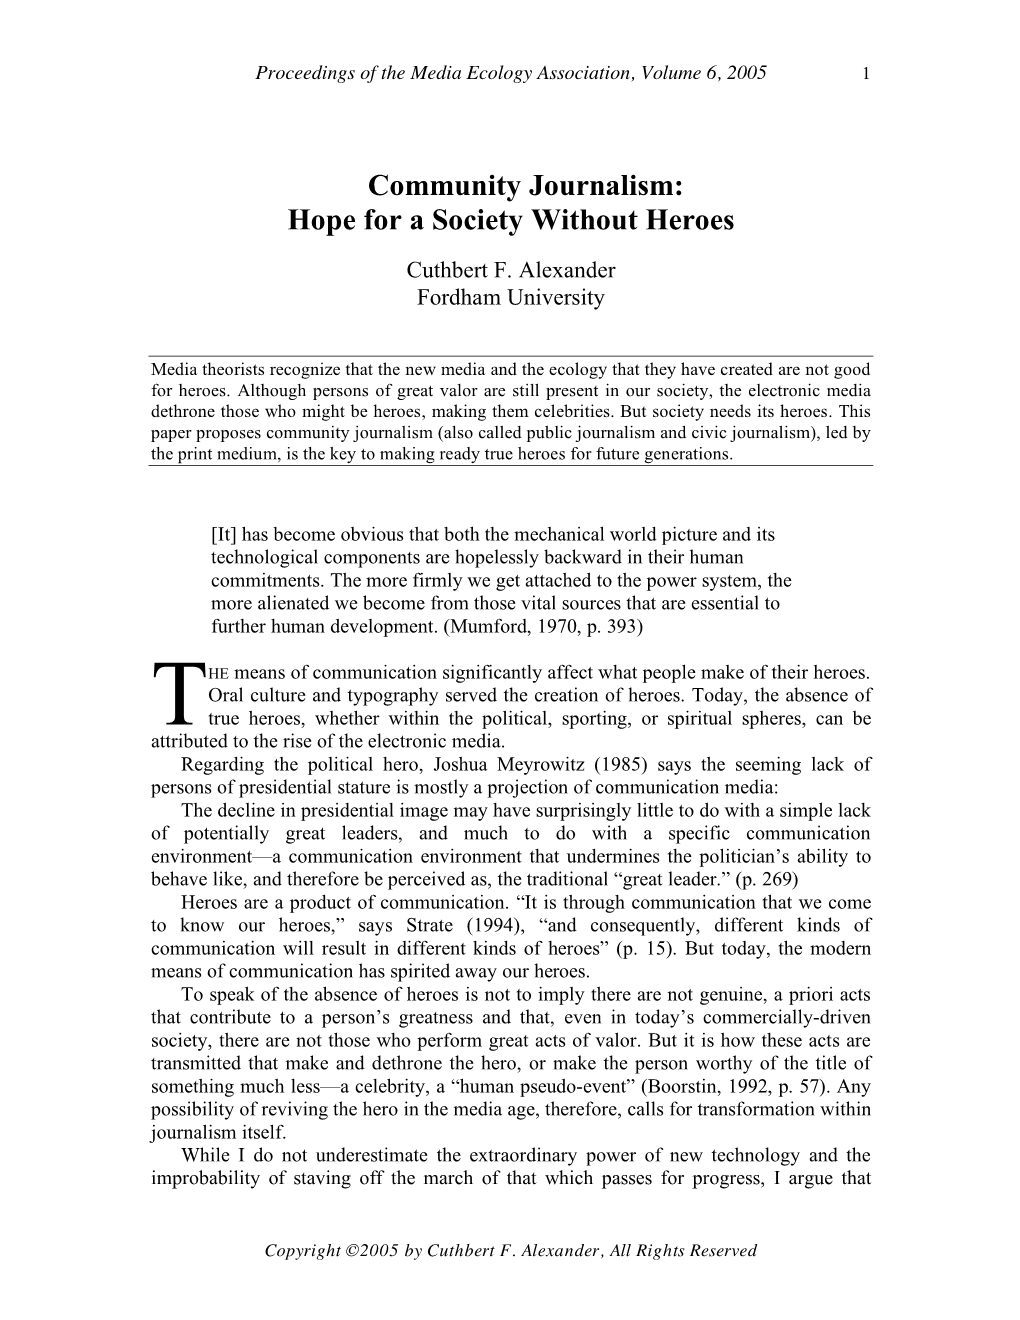 Cuthbert F. Alexander, “Community Journalism: Hope for a Society